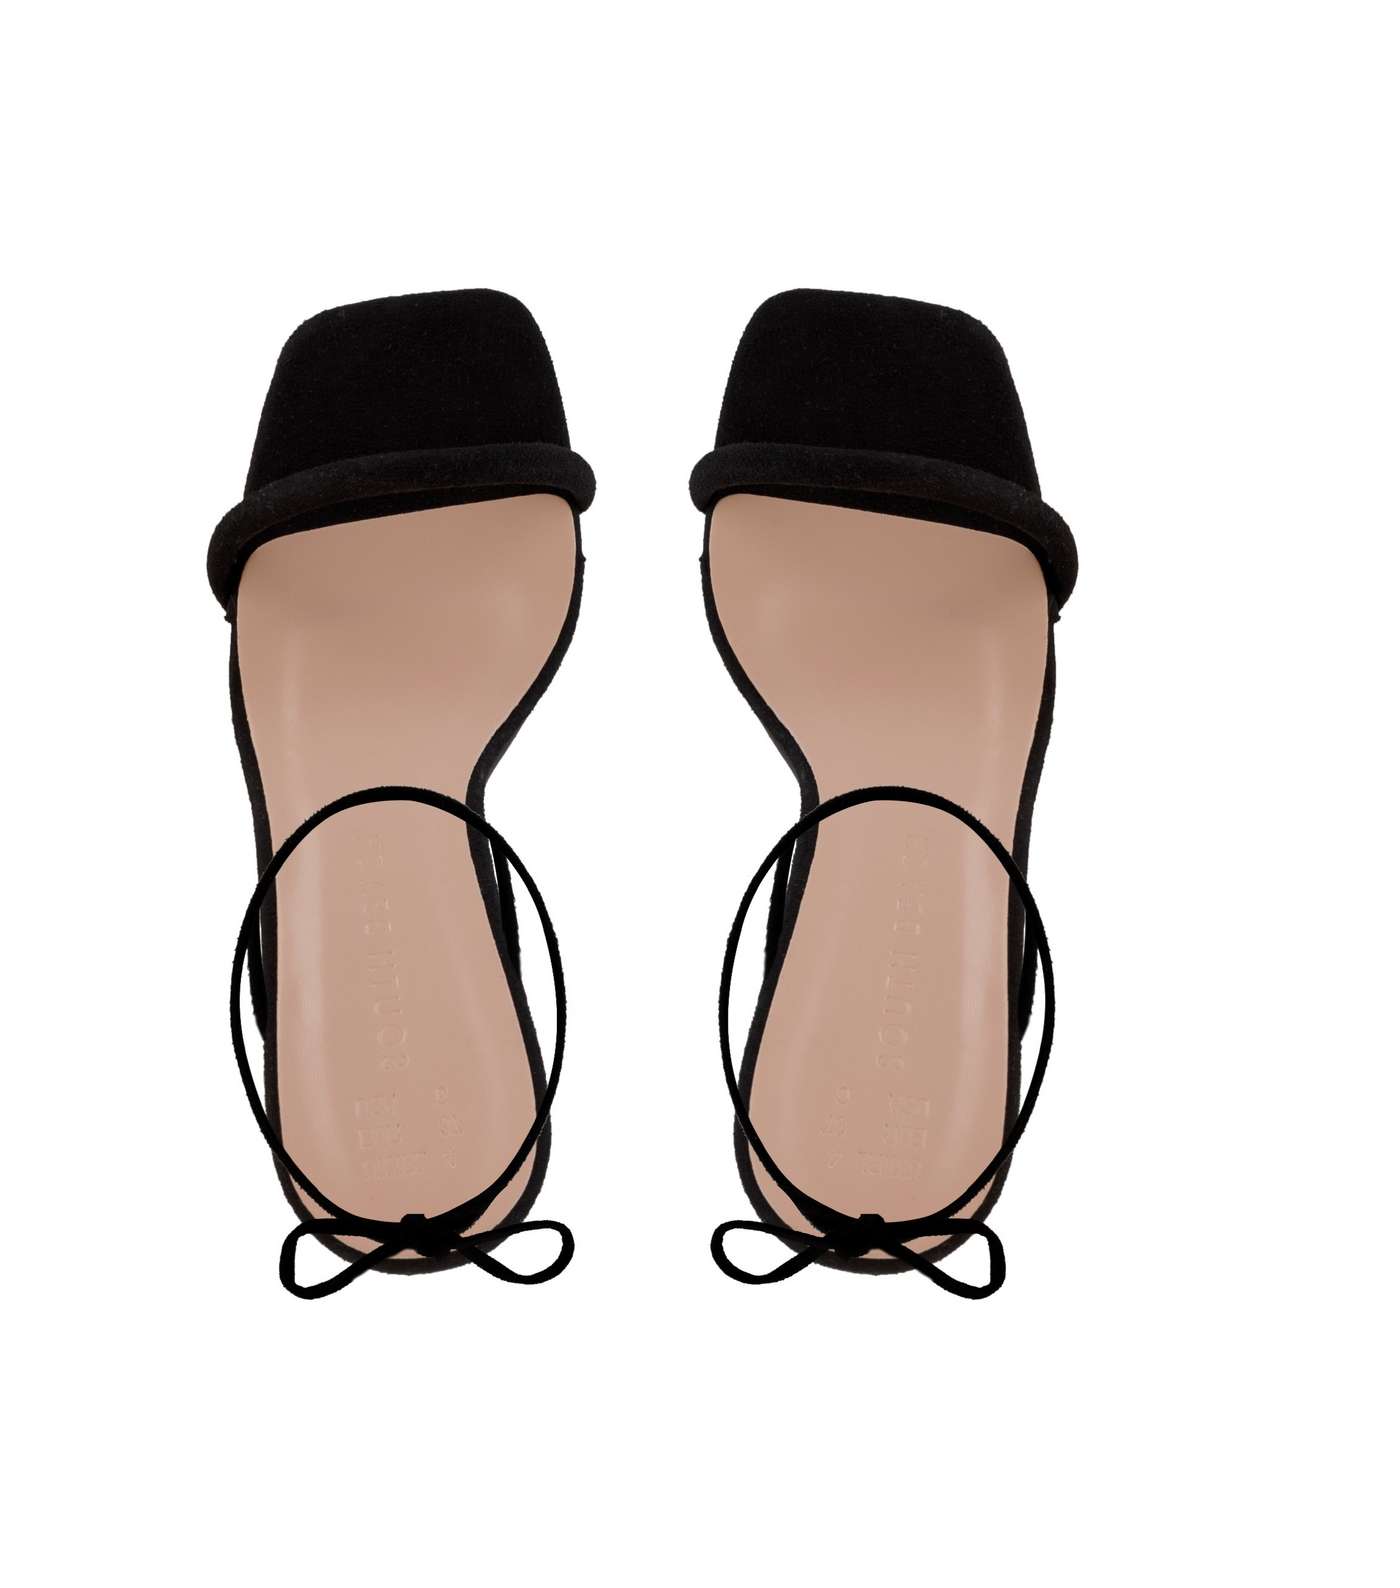 South Beach Black Tie Faux Bamboo Heel Sandals Image 4